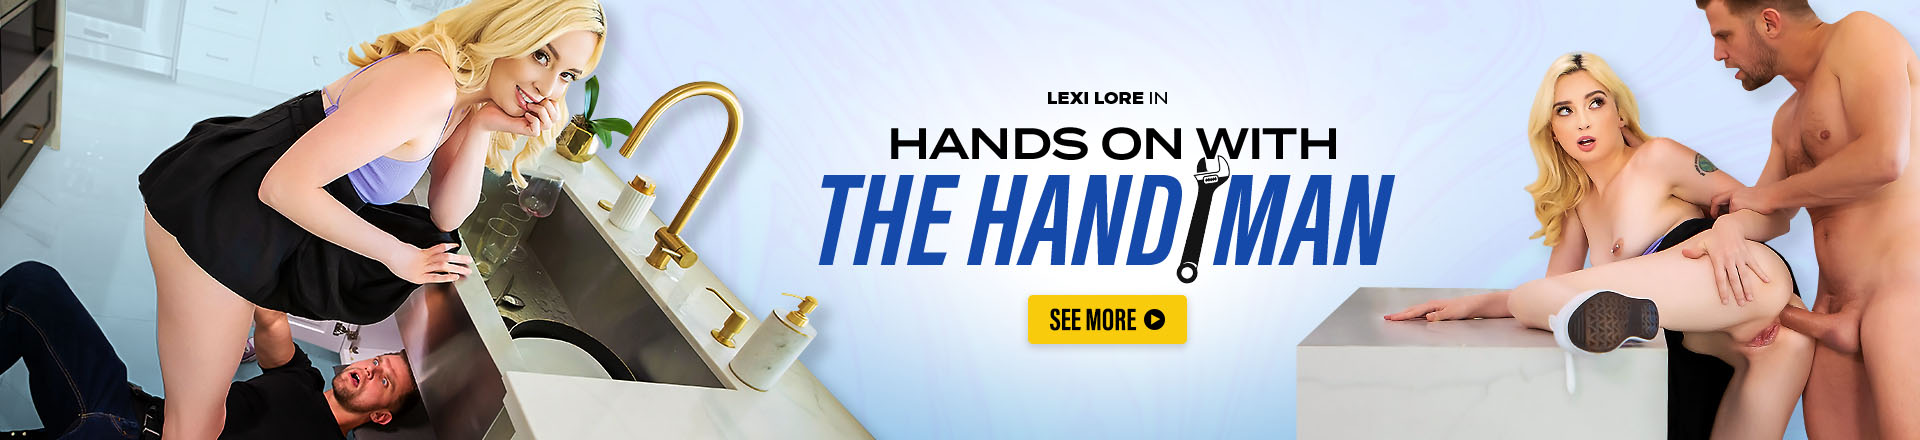 This is an advertisement banner for LetsDoeIt